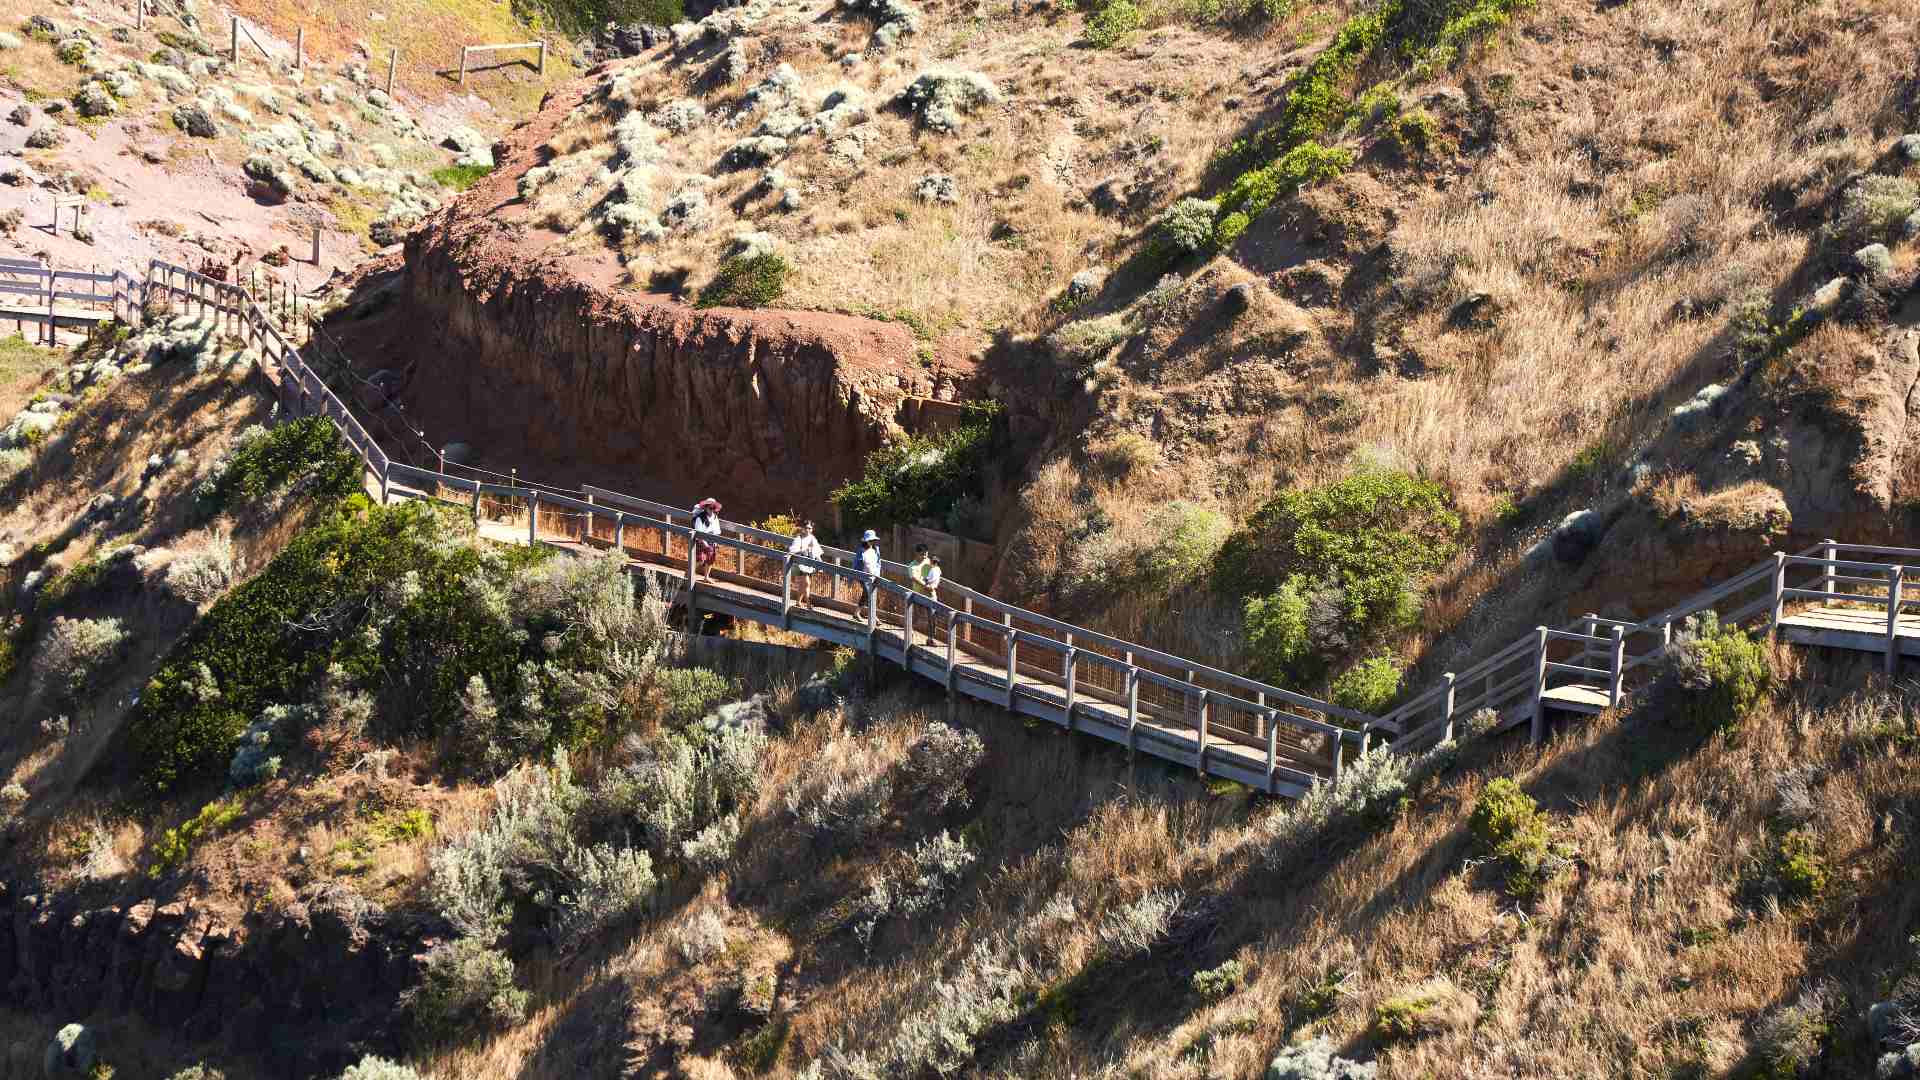 A Weekend Guide to Cape Schanck for Your Next Coastal Road Trip